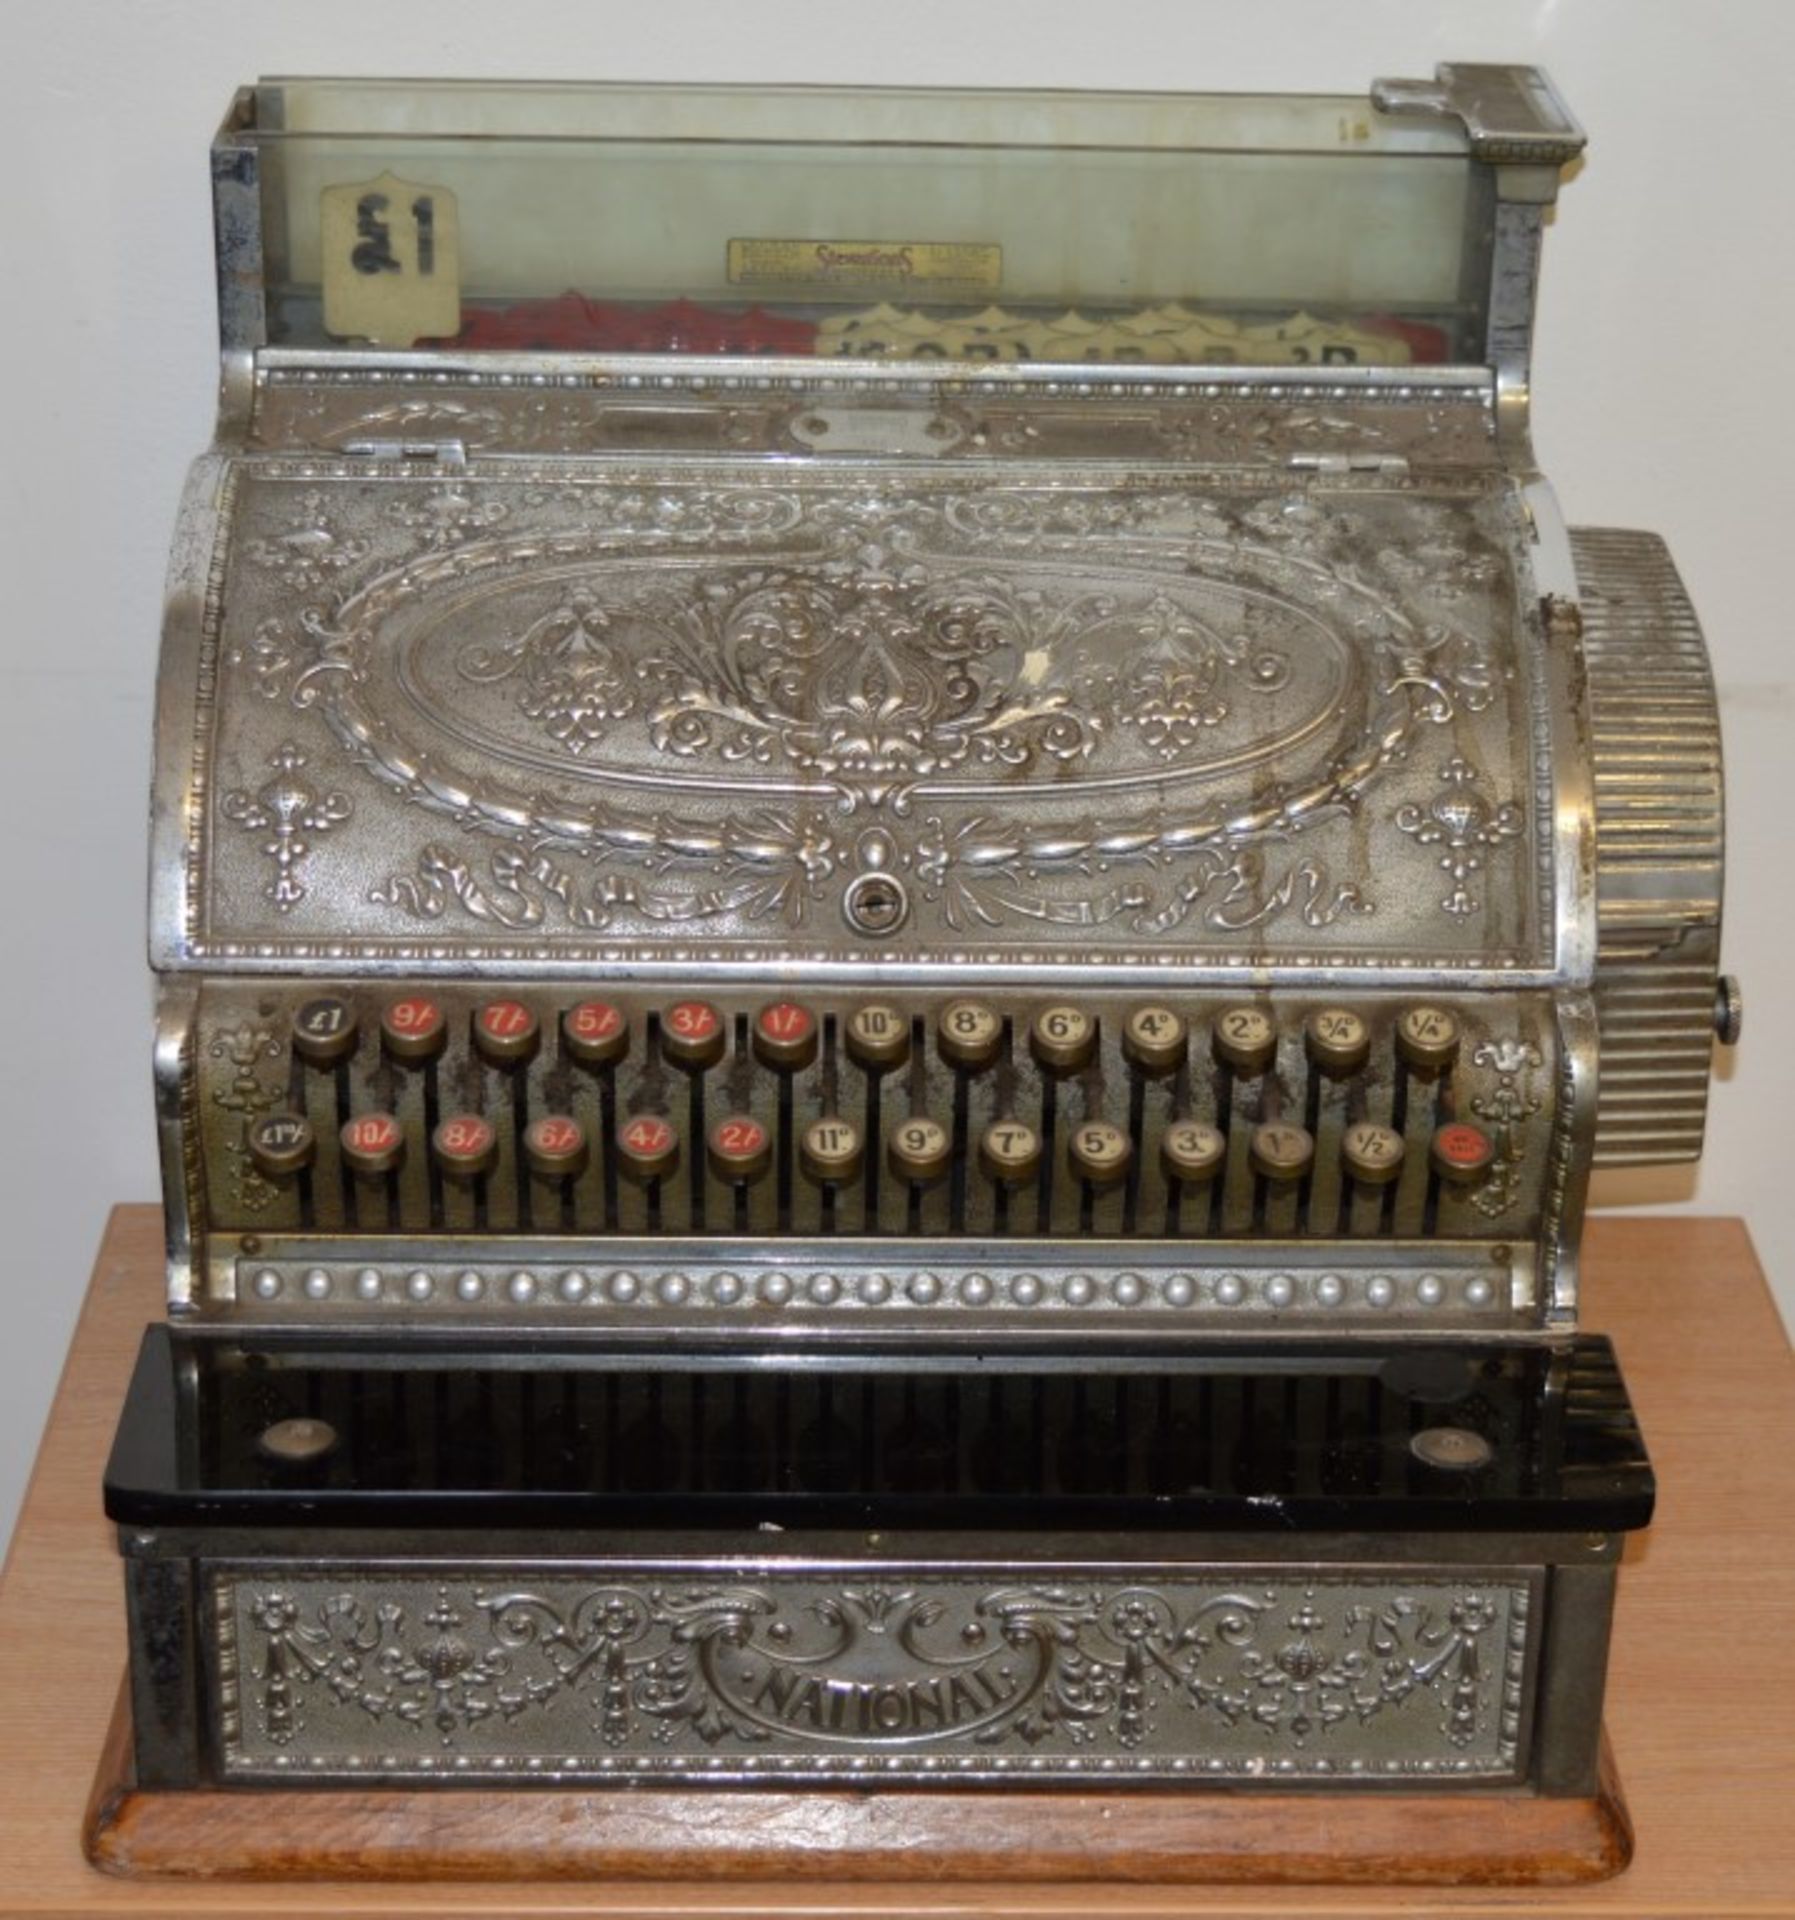 1 x Exquisite Antique National Cash Register - Circa Early 1900's - Perfect For Barbers Shop, Tattoo - Image 2 of 35